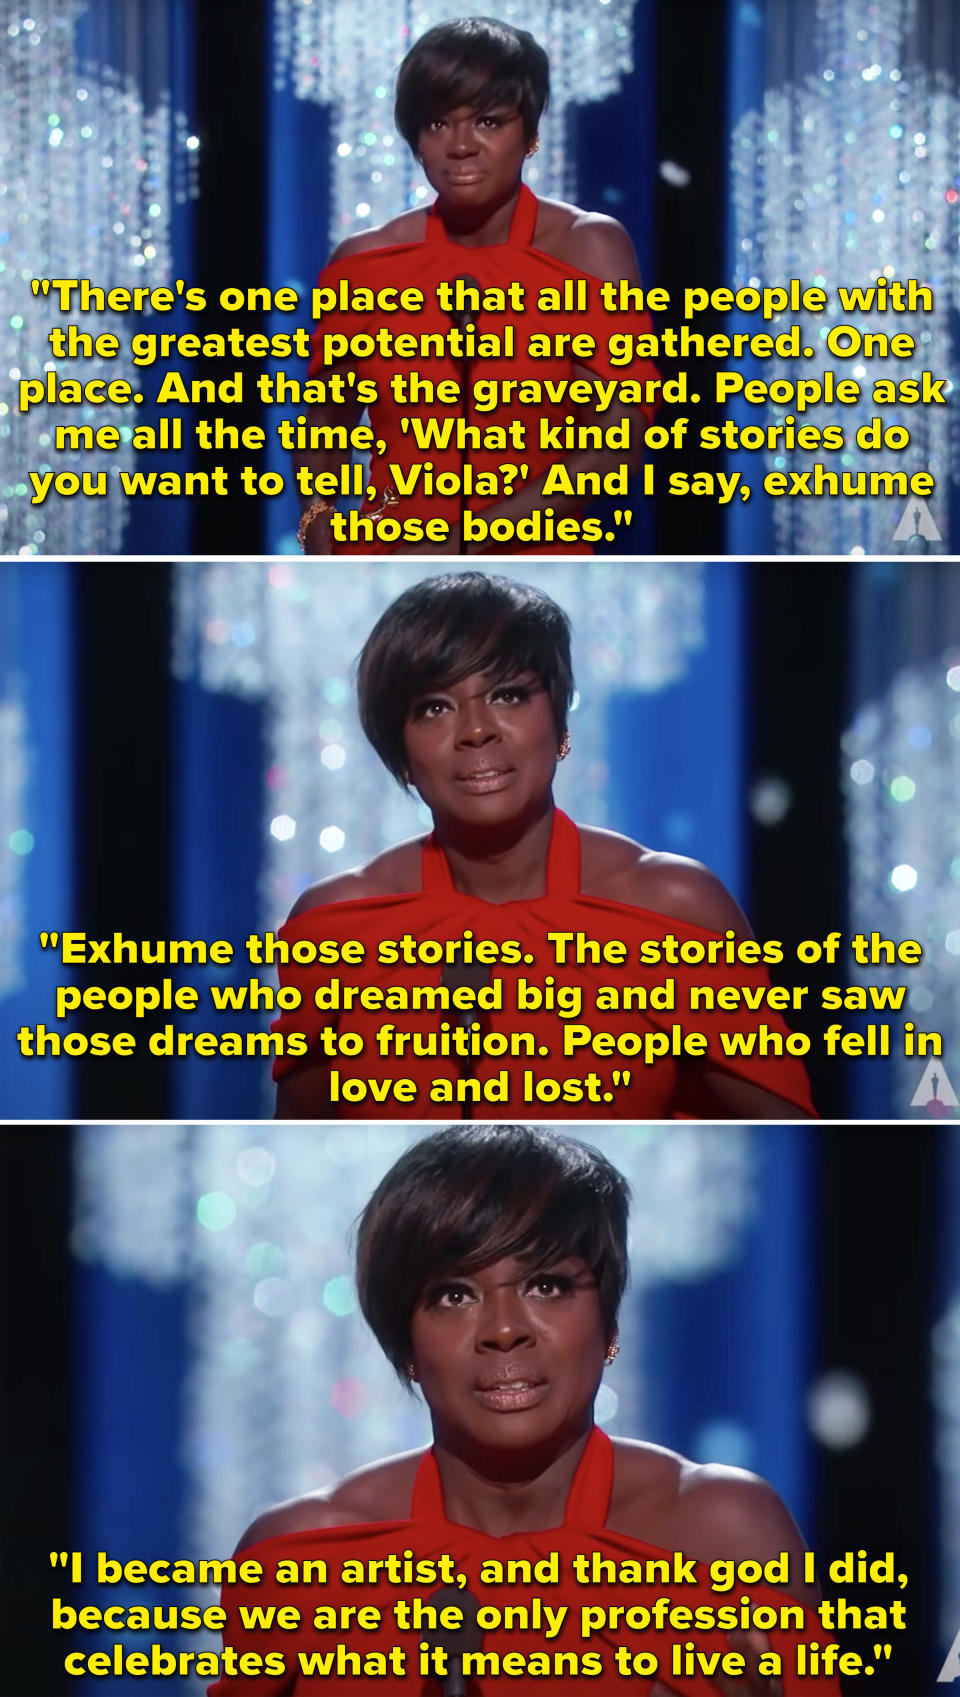 Viola Davis accepting her award and saying she wants to tell stories about people who didn't get to share their achievements with the world